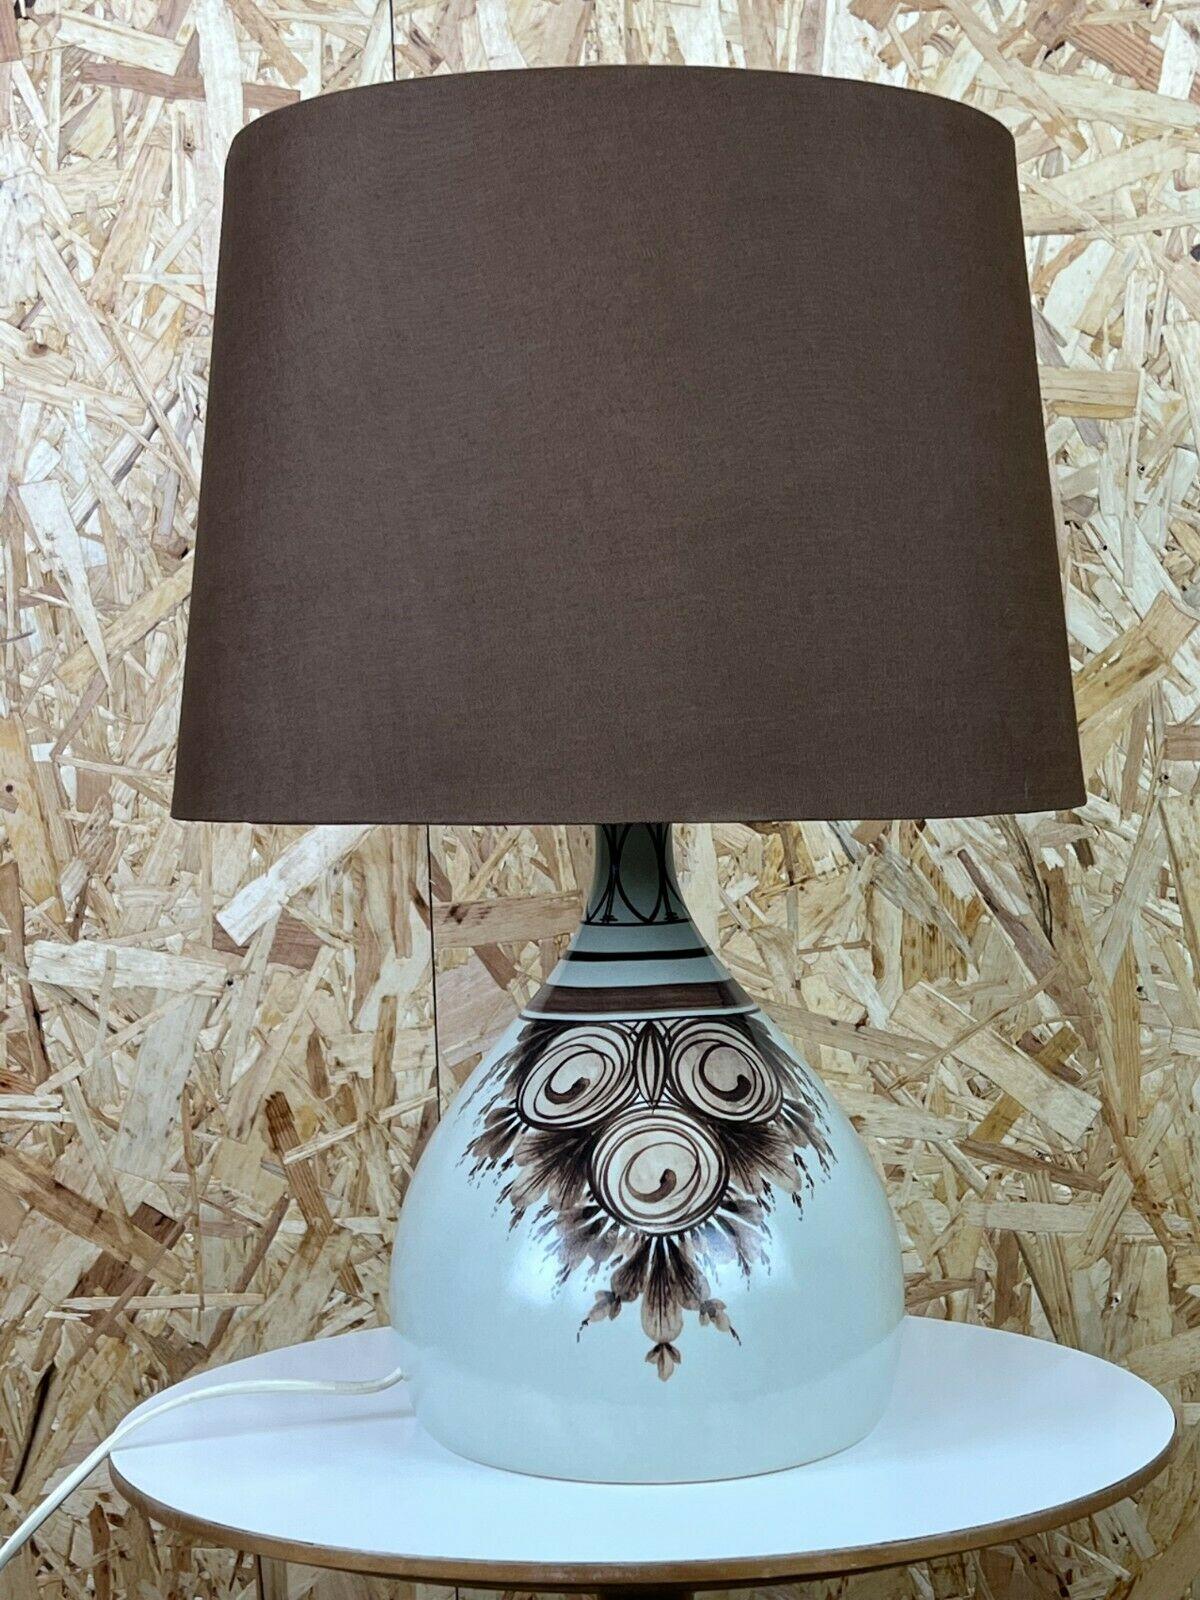 60s 70s Lamp Light Table Lamp Ceramic Bjorn Wiinblad Rosenthal Design In Good Condition For Sale In Neuenkirchen, NI